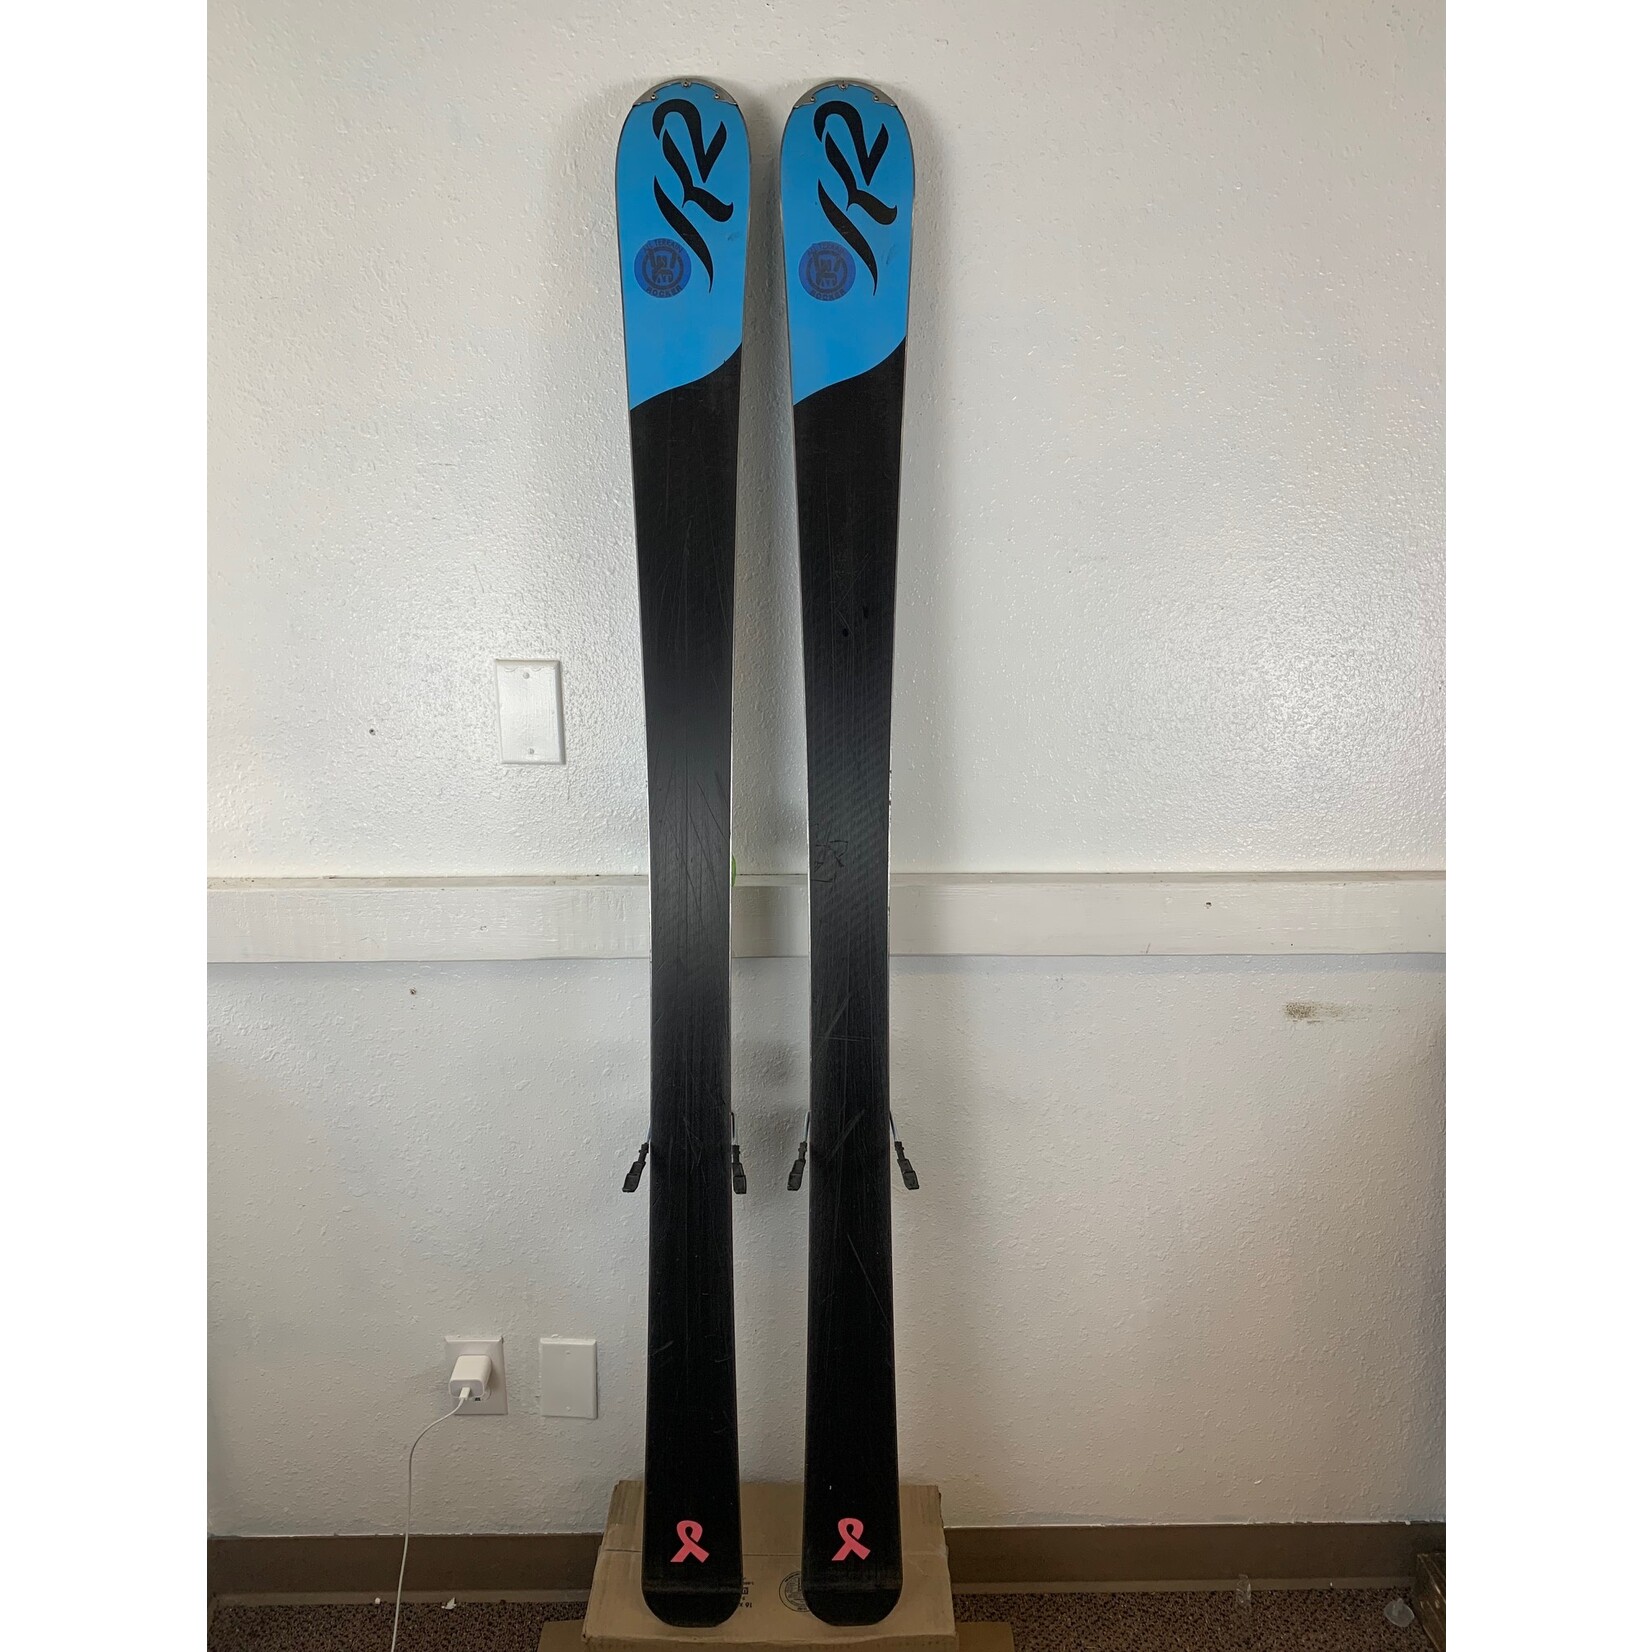 K2 K2 Superstitious Skis + Marker Squire Bindings, Size 160cm (Set for 26 boot)